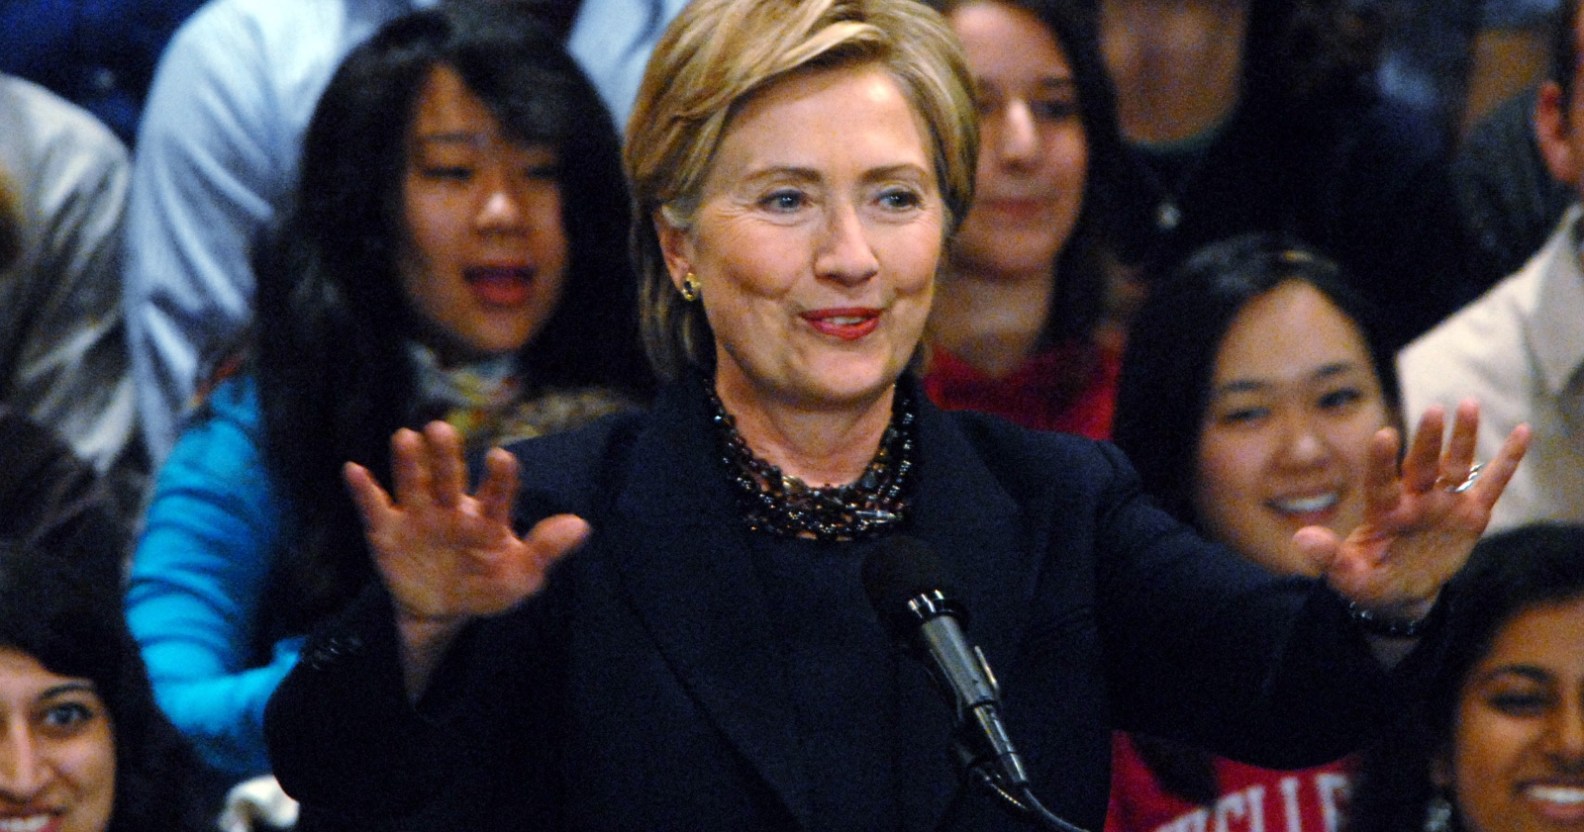 Hilary Clinton gives a speech at Wellesley College